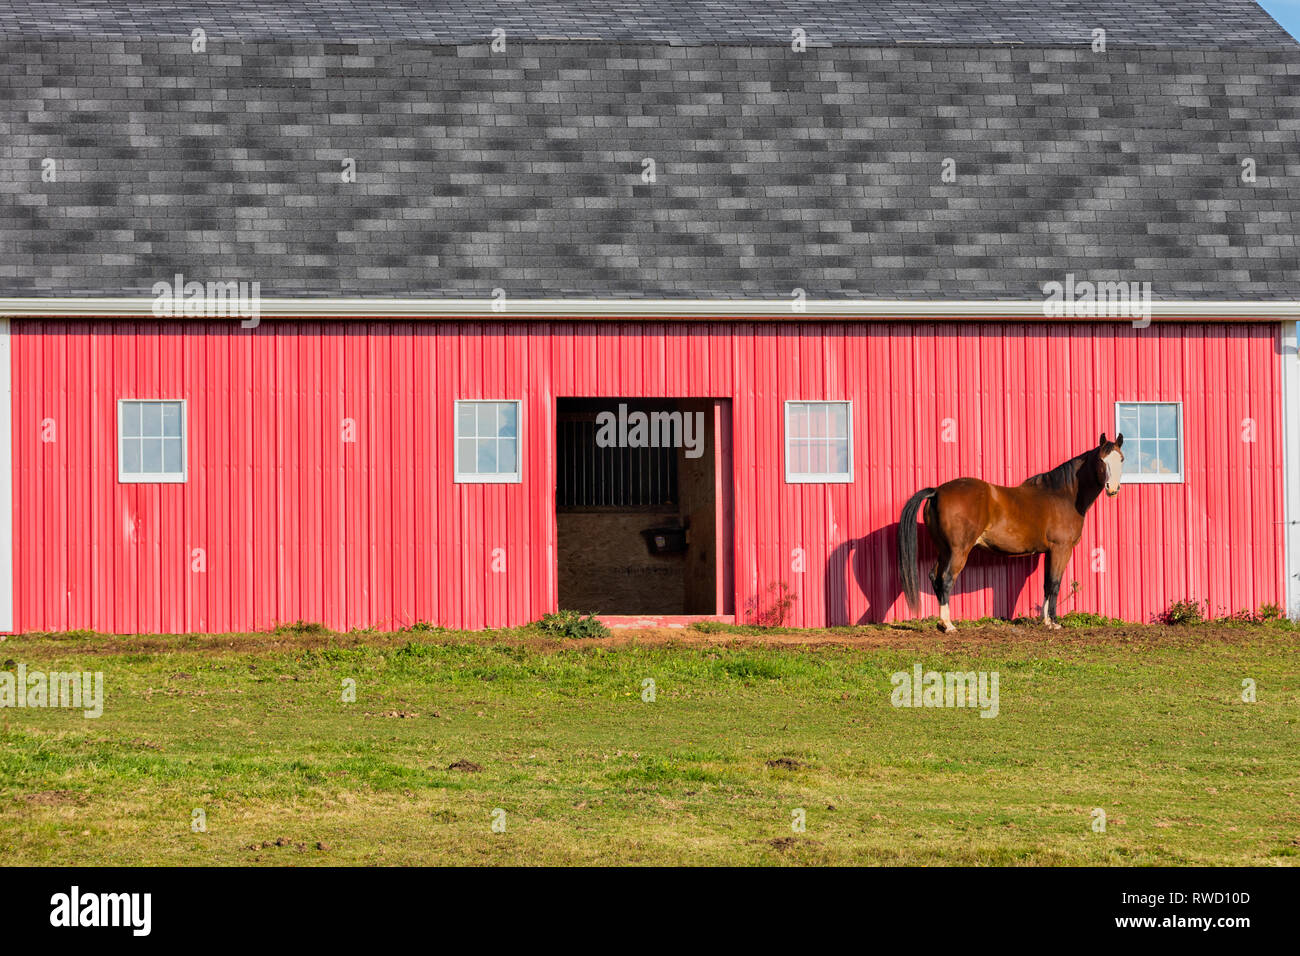 Horse and red barn, Stanchel, Prince Edward Island, Canada Stock Photo